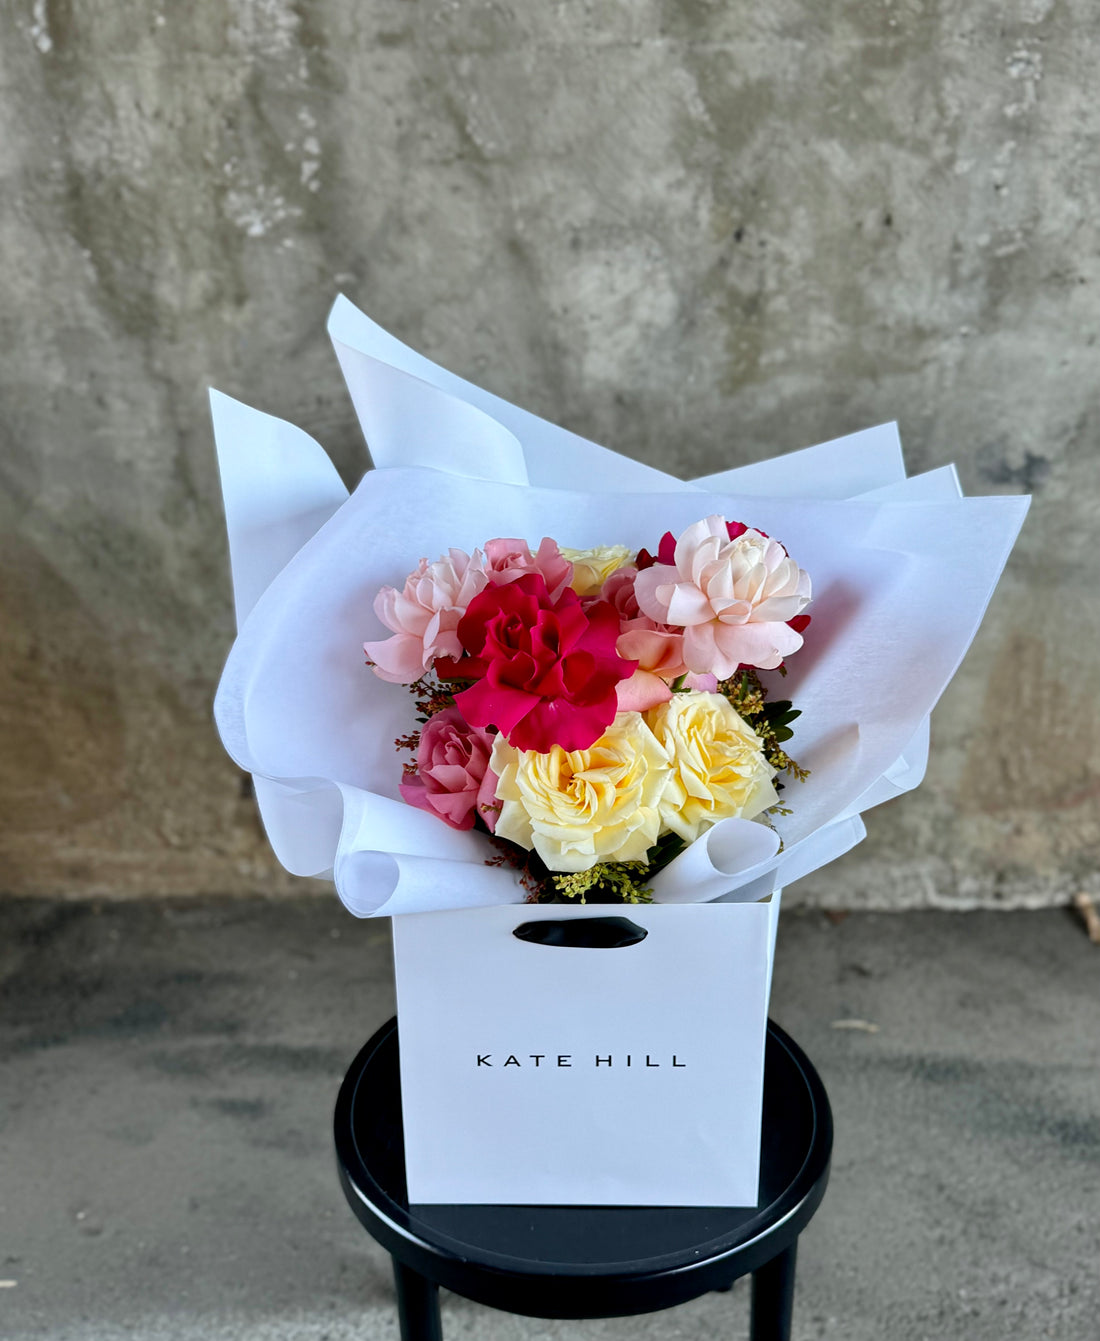 A bouquet of mixed coloured reflexed roses, beautifully wrapped in white and placed into a KHF flower bag. Bouquet sitting on a black bentwood chair against a concrete wall.